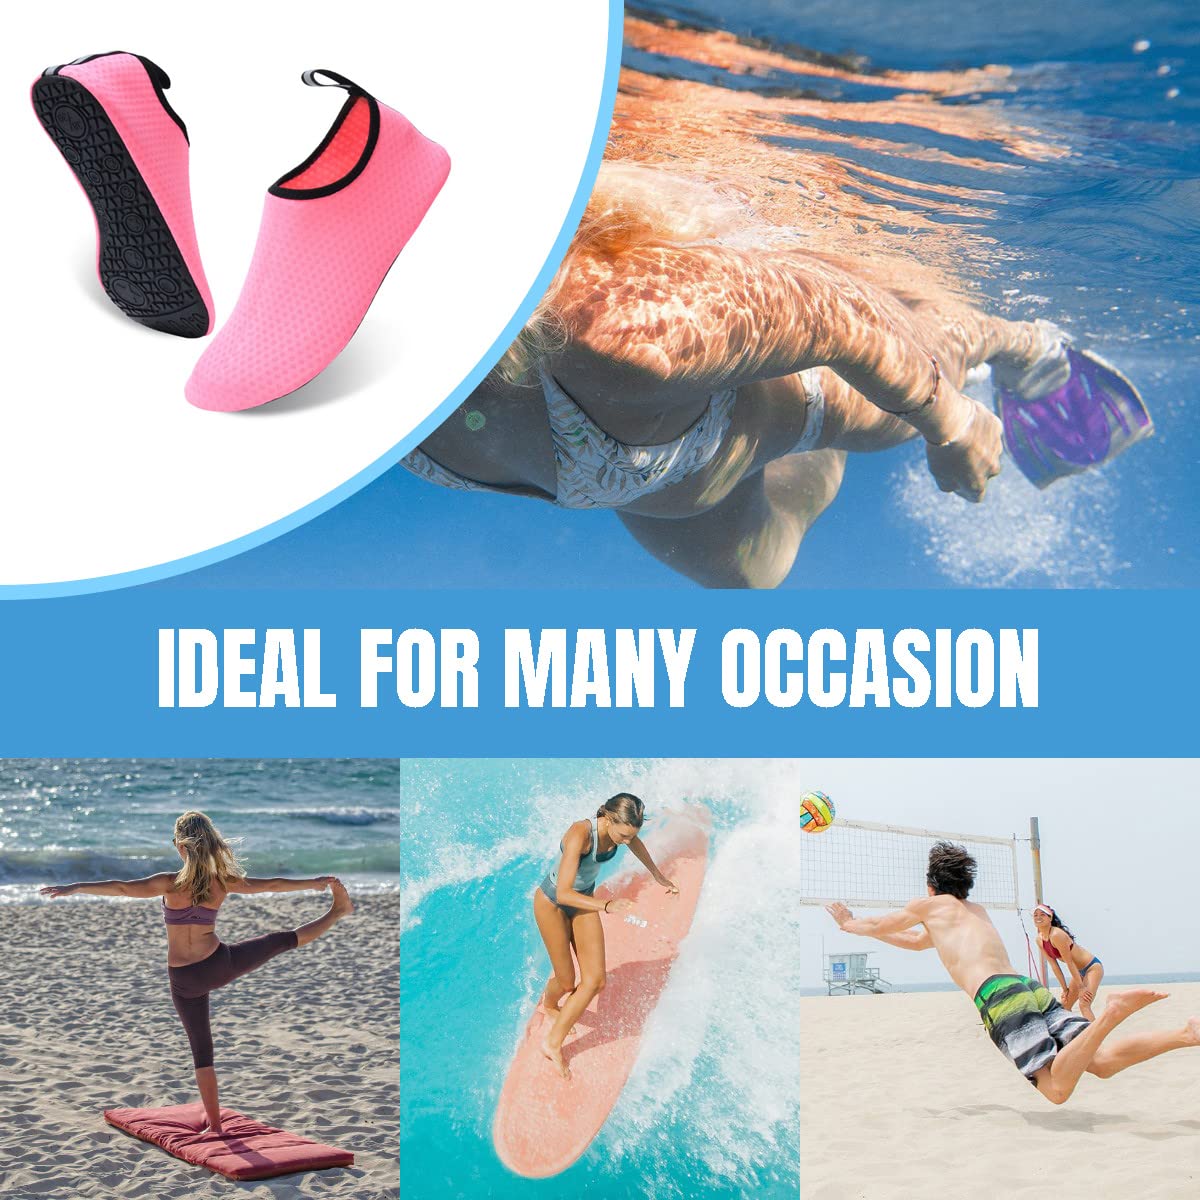 AUXDIQ Water Shoes Outdoor Quick Dry Unisex Sports Aqua Shoes for Beach Diving Snorkeling Surfing Mens Womens Pink 3.5/4